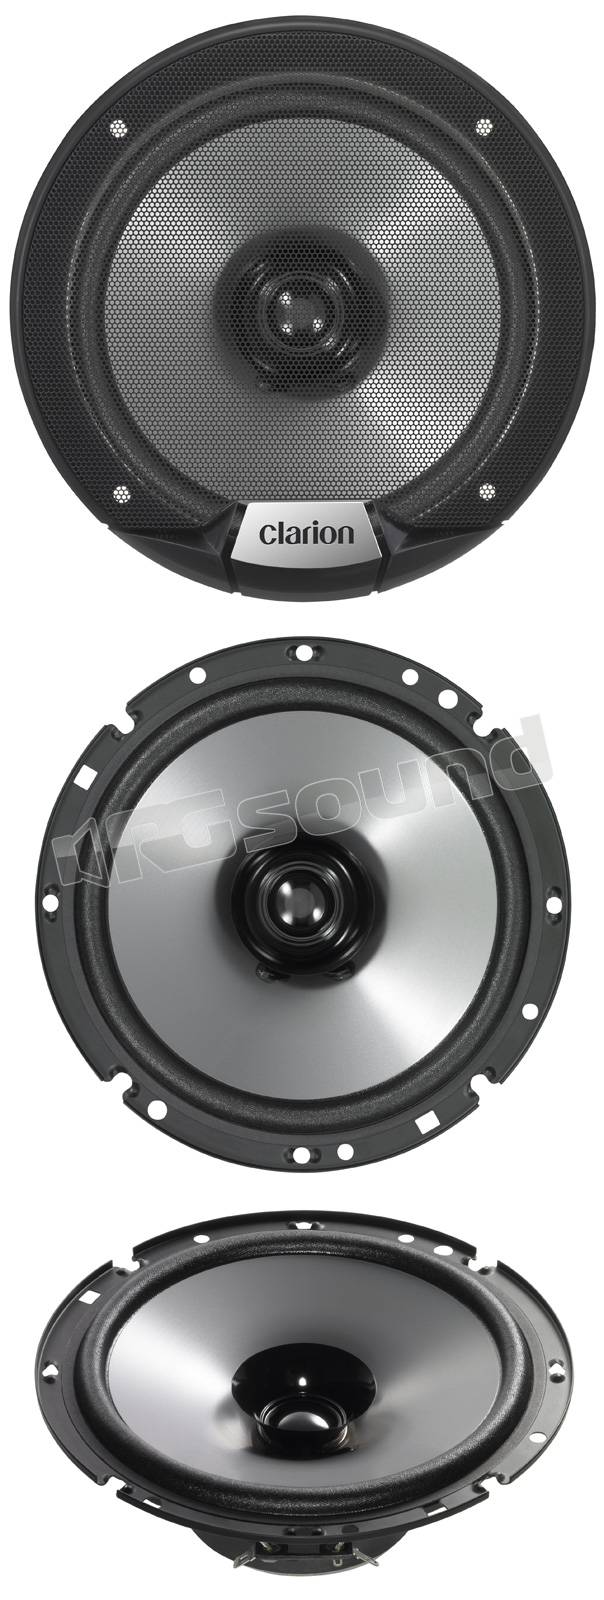 Clarion SRG1713R